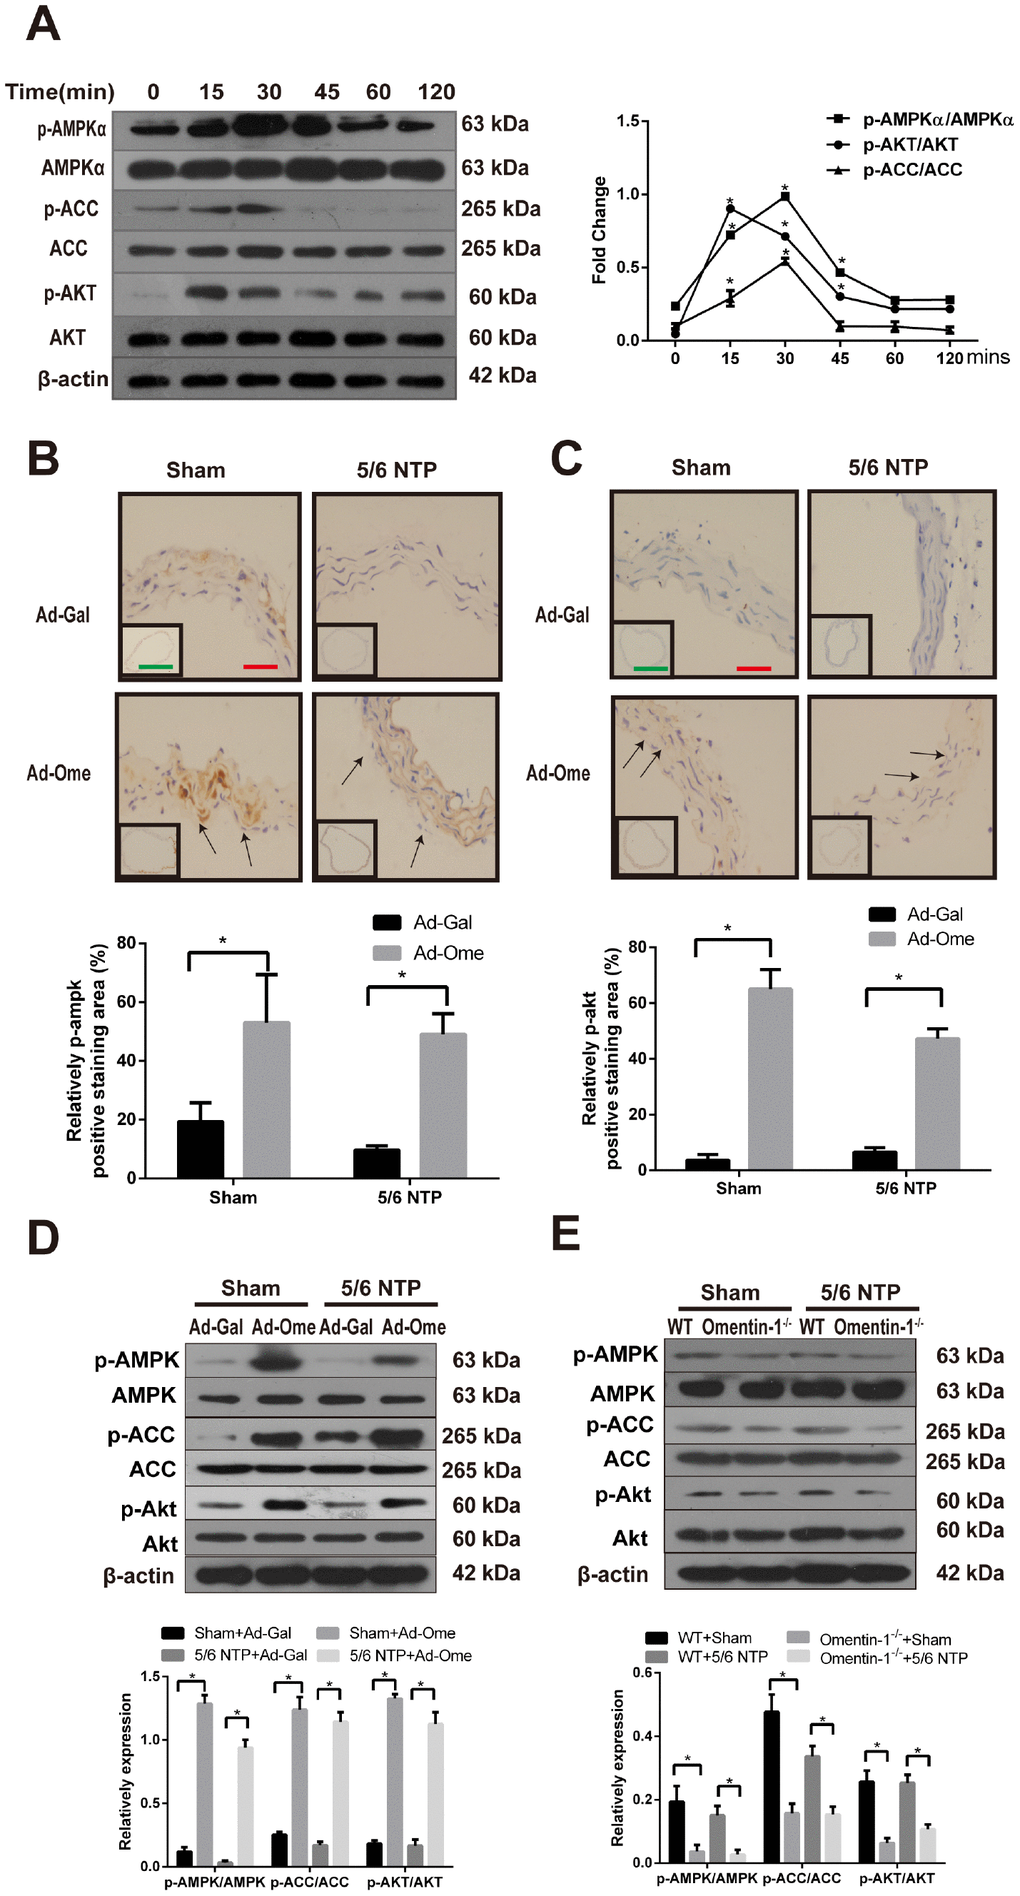 Effects of omentin-1 on activation of AMPK and Akt phosphorylation in CVSMCs and the 5/6 NTP-induced mouse calcification model. (A) CVSMCs were incubated with 400 ng/ml omentin-1 for either 0, 15, 30, 45, 60, or 120 min. Cells lysates were tested by western blot and incubated with antibodies against p-AMPKα, AMPKα, p-Akt, Akt, p-ACC and ACC. Representative results were shown in the left panel and densitometric quantification analysis for phosphorylation of Akt, AMPK and ACC was presented in the right panel. *p B) Representative immunostaining of phosphorylation of AMPK proteins (upper panel) and quantity of positive staining area in the thoracic aorta were shown in the lower panel (lower panel). (C) Representative immunostaining of phosphorylation of Akt proteins (upper panel) and quantity of positive staining area in the thoracic aorta were shown in the lower panel (lower panel). (D) Expression of p-AMPK, p-ACC and p-Akt in the mouse aorta treated with Ad-Ome or Ad-Gal were analyzed by western blot. (E) Expression of p-AMPK, p-ACC and p-Akt in the aorta of omentin-1 knockout mice or wild type mice were analyzed by western blot. Scale bar 20 μm (Red) and 500 μm (Green). *p 